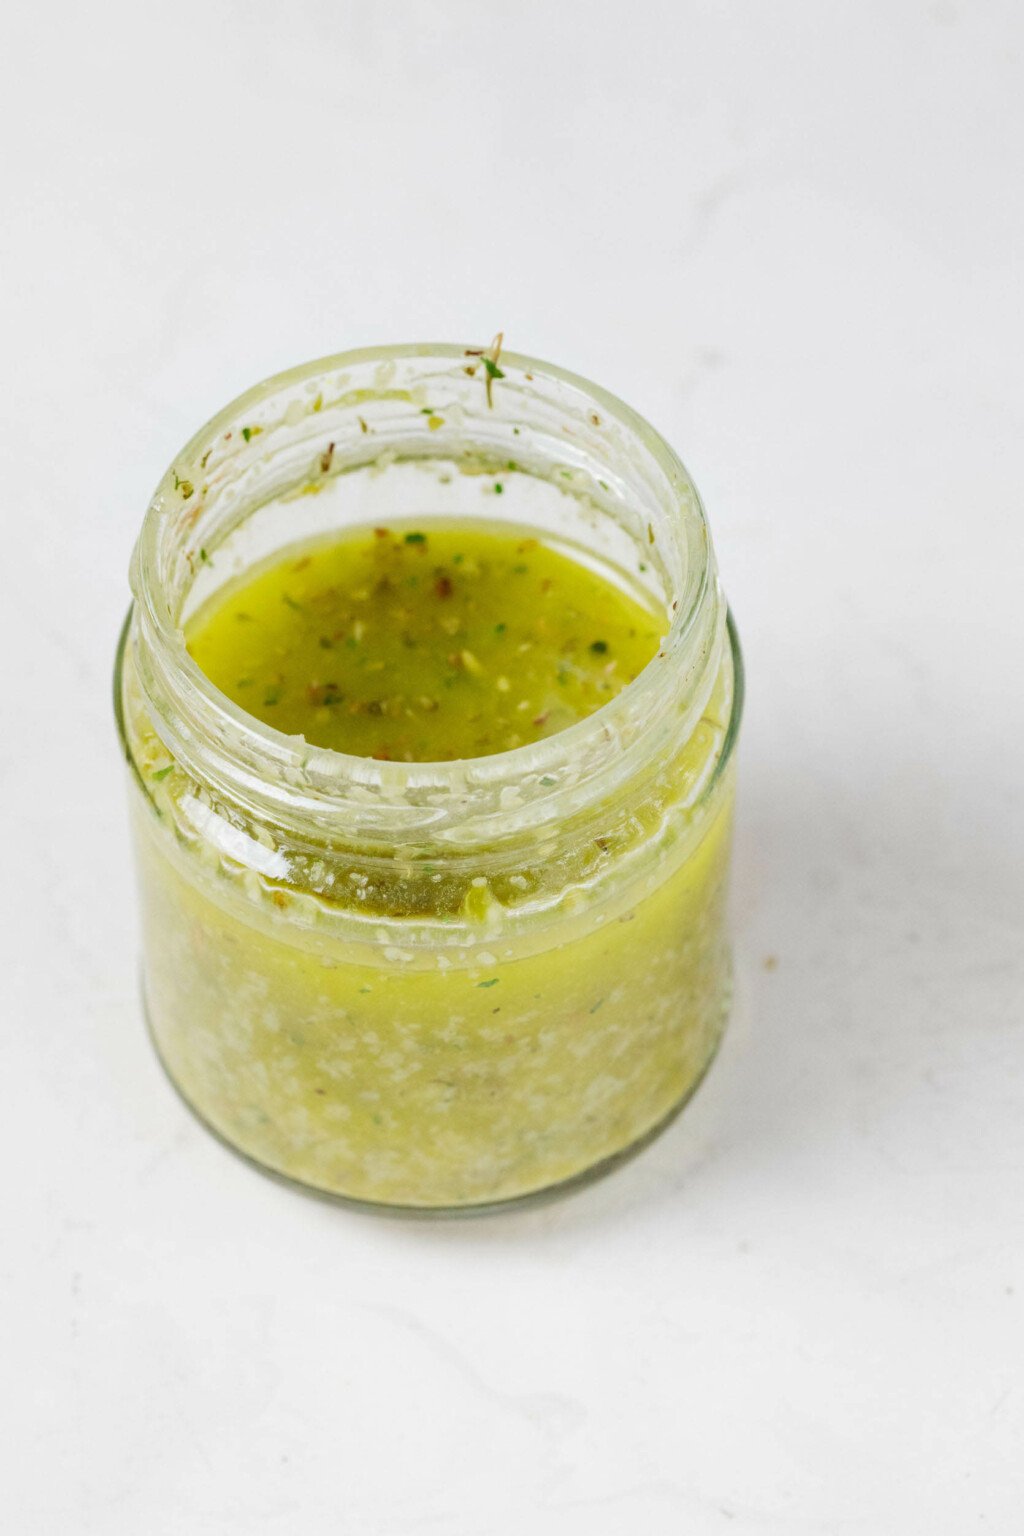 An angled image of a jar of salad dressing, which has been made with pale green olive oil. It rests on a white surface.